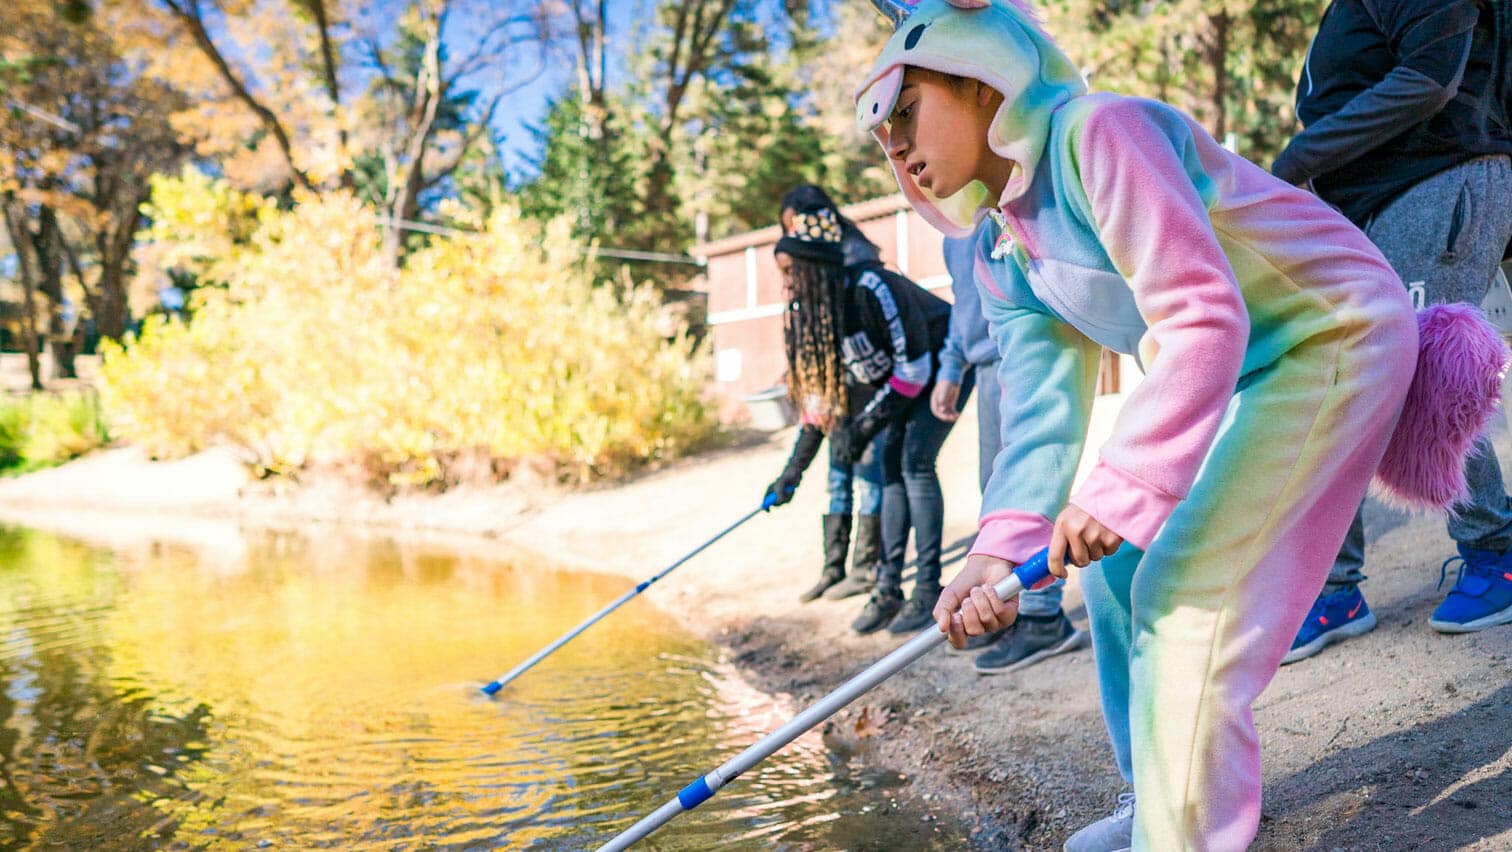 Student in unicorn onesie stands with group to catch frogs in pond